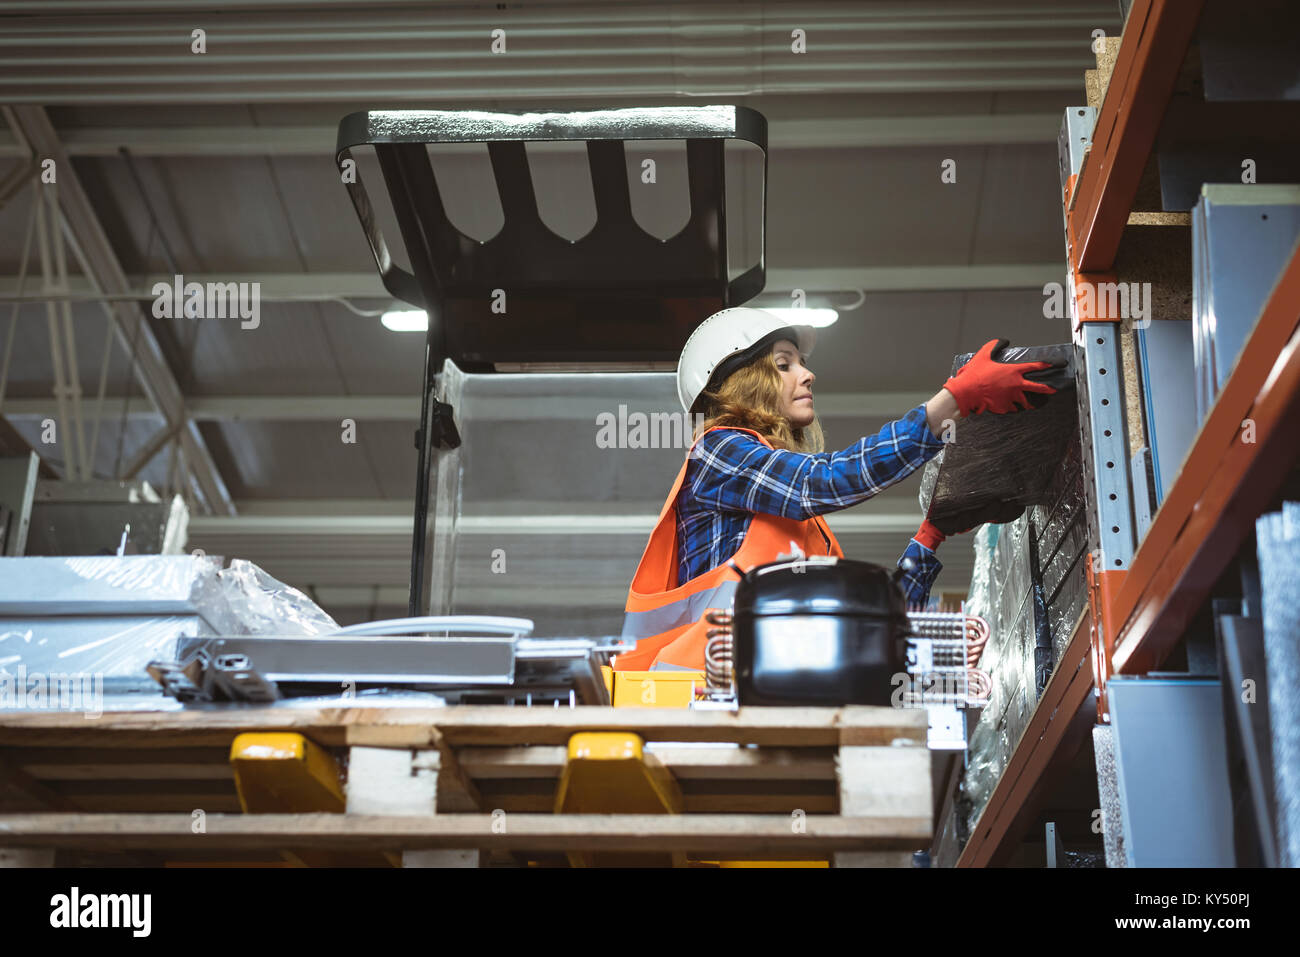 Female worker unloading machine part from rack Stock Photo